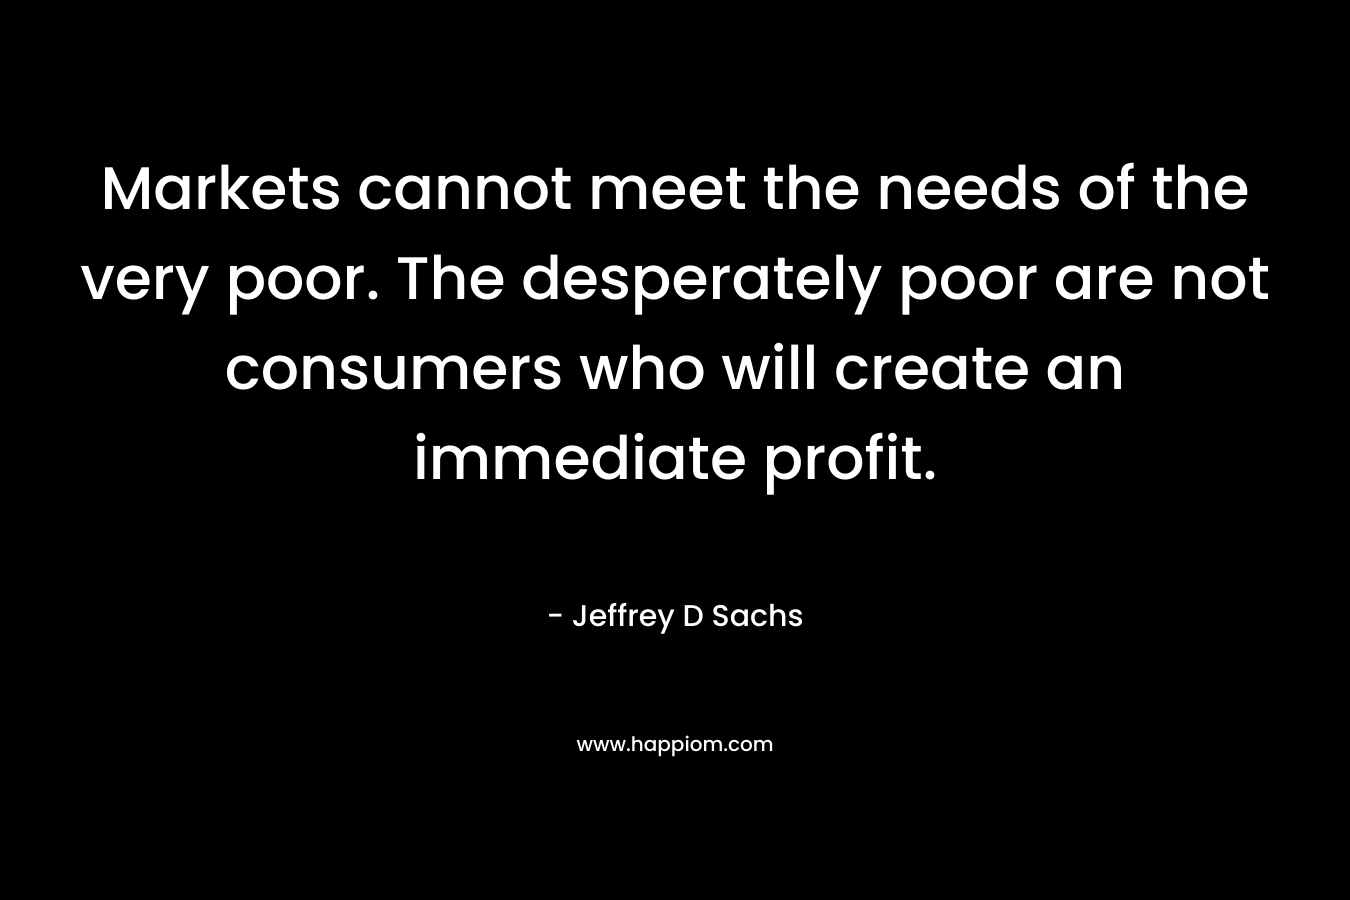 Markets cannot meet the needs of the very poor. The desperately poor are not consumers who will create an immediate profit.